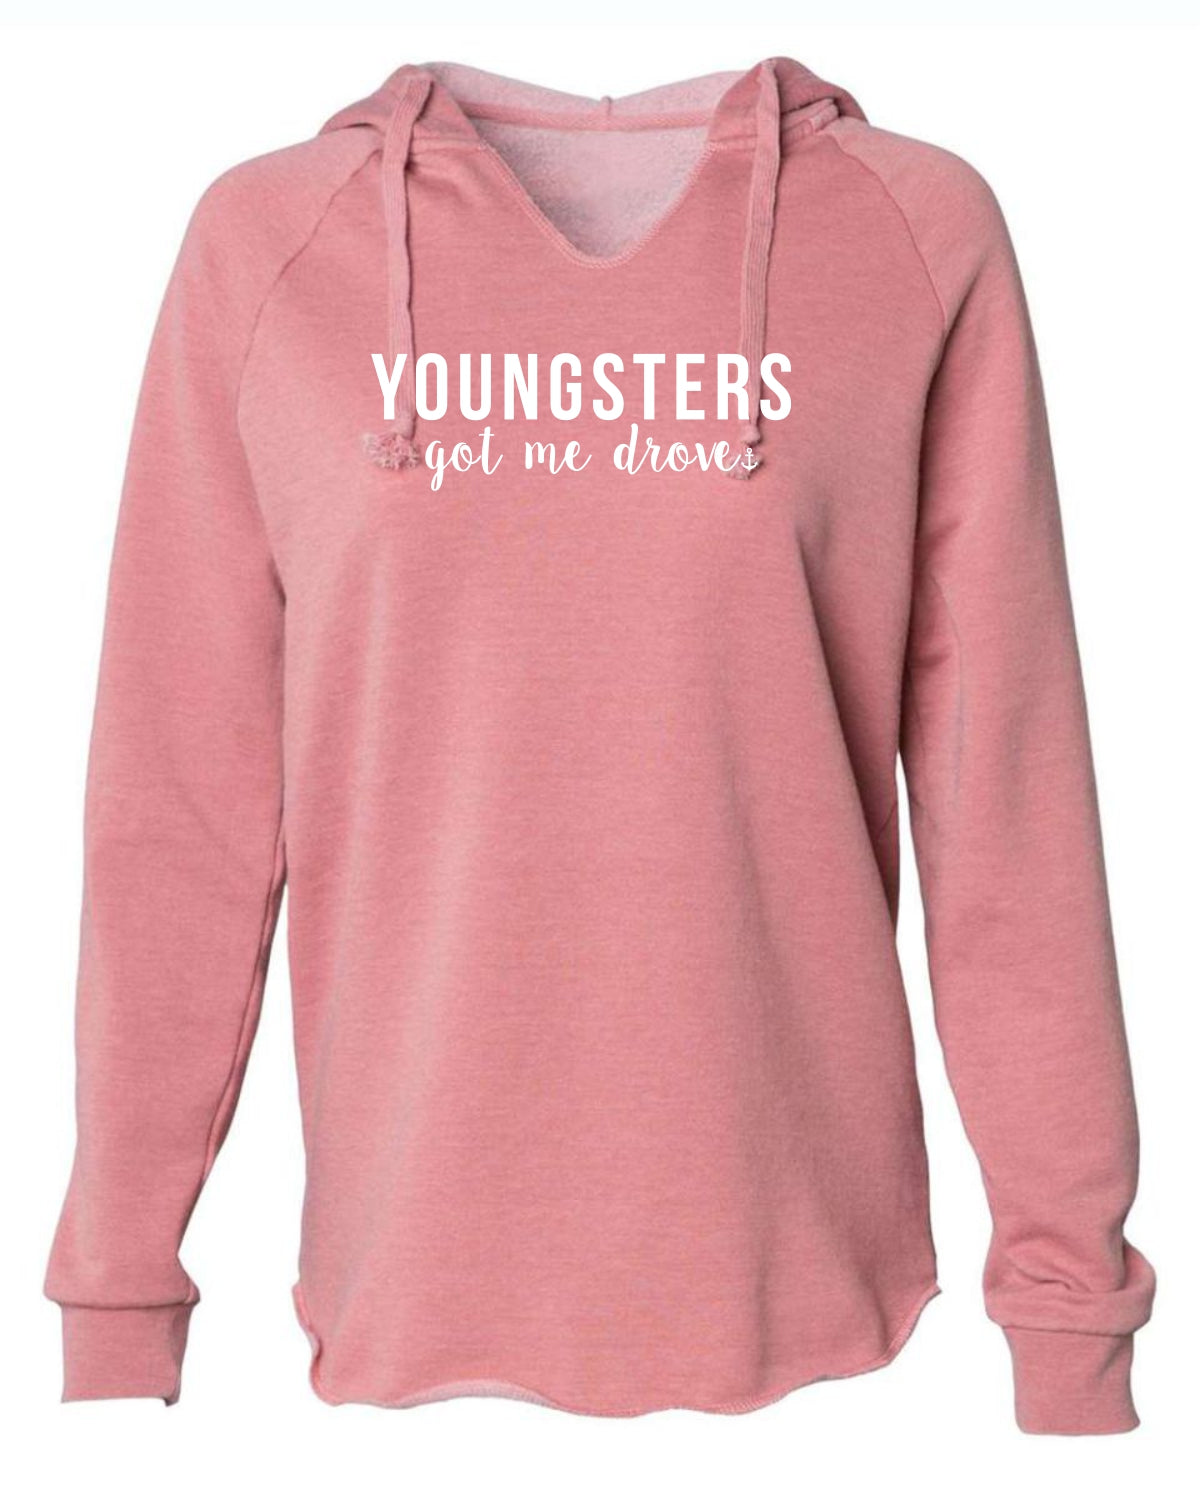 "Youngsters Got Me Drove" Ladies' Hoodie